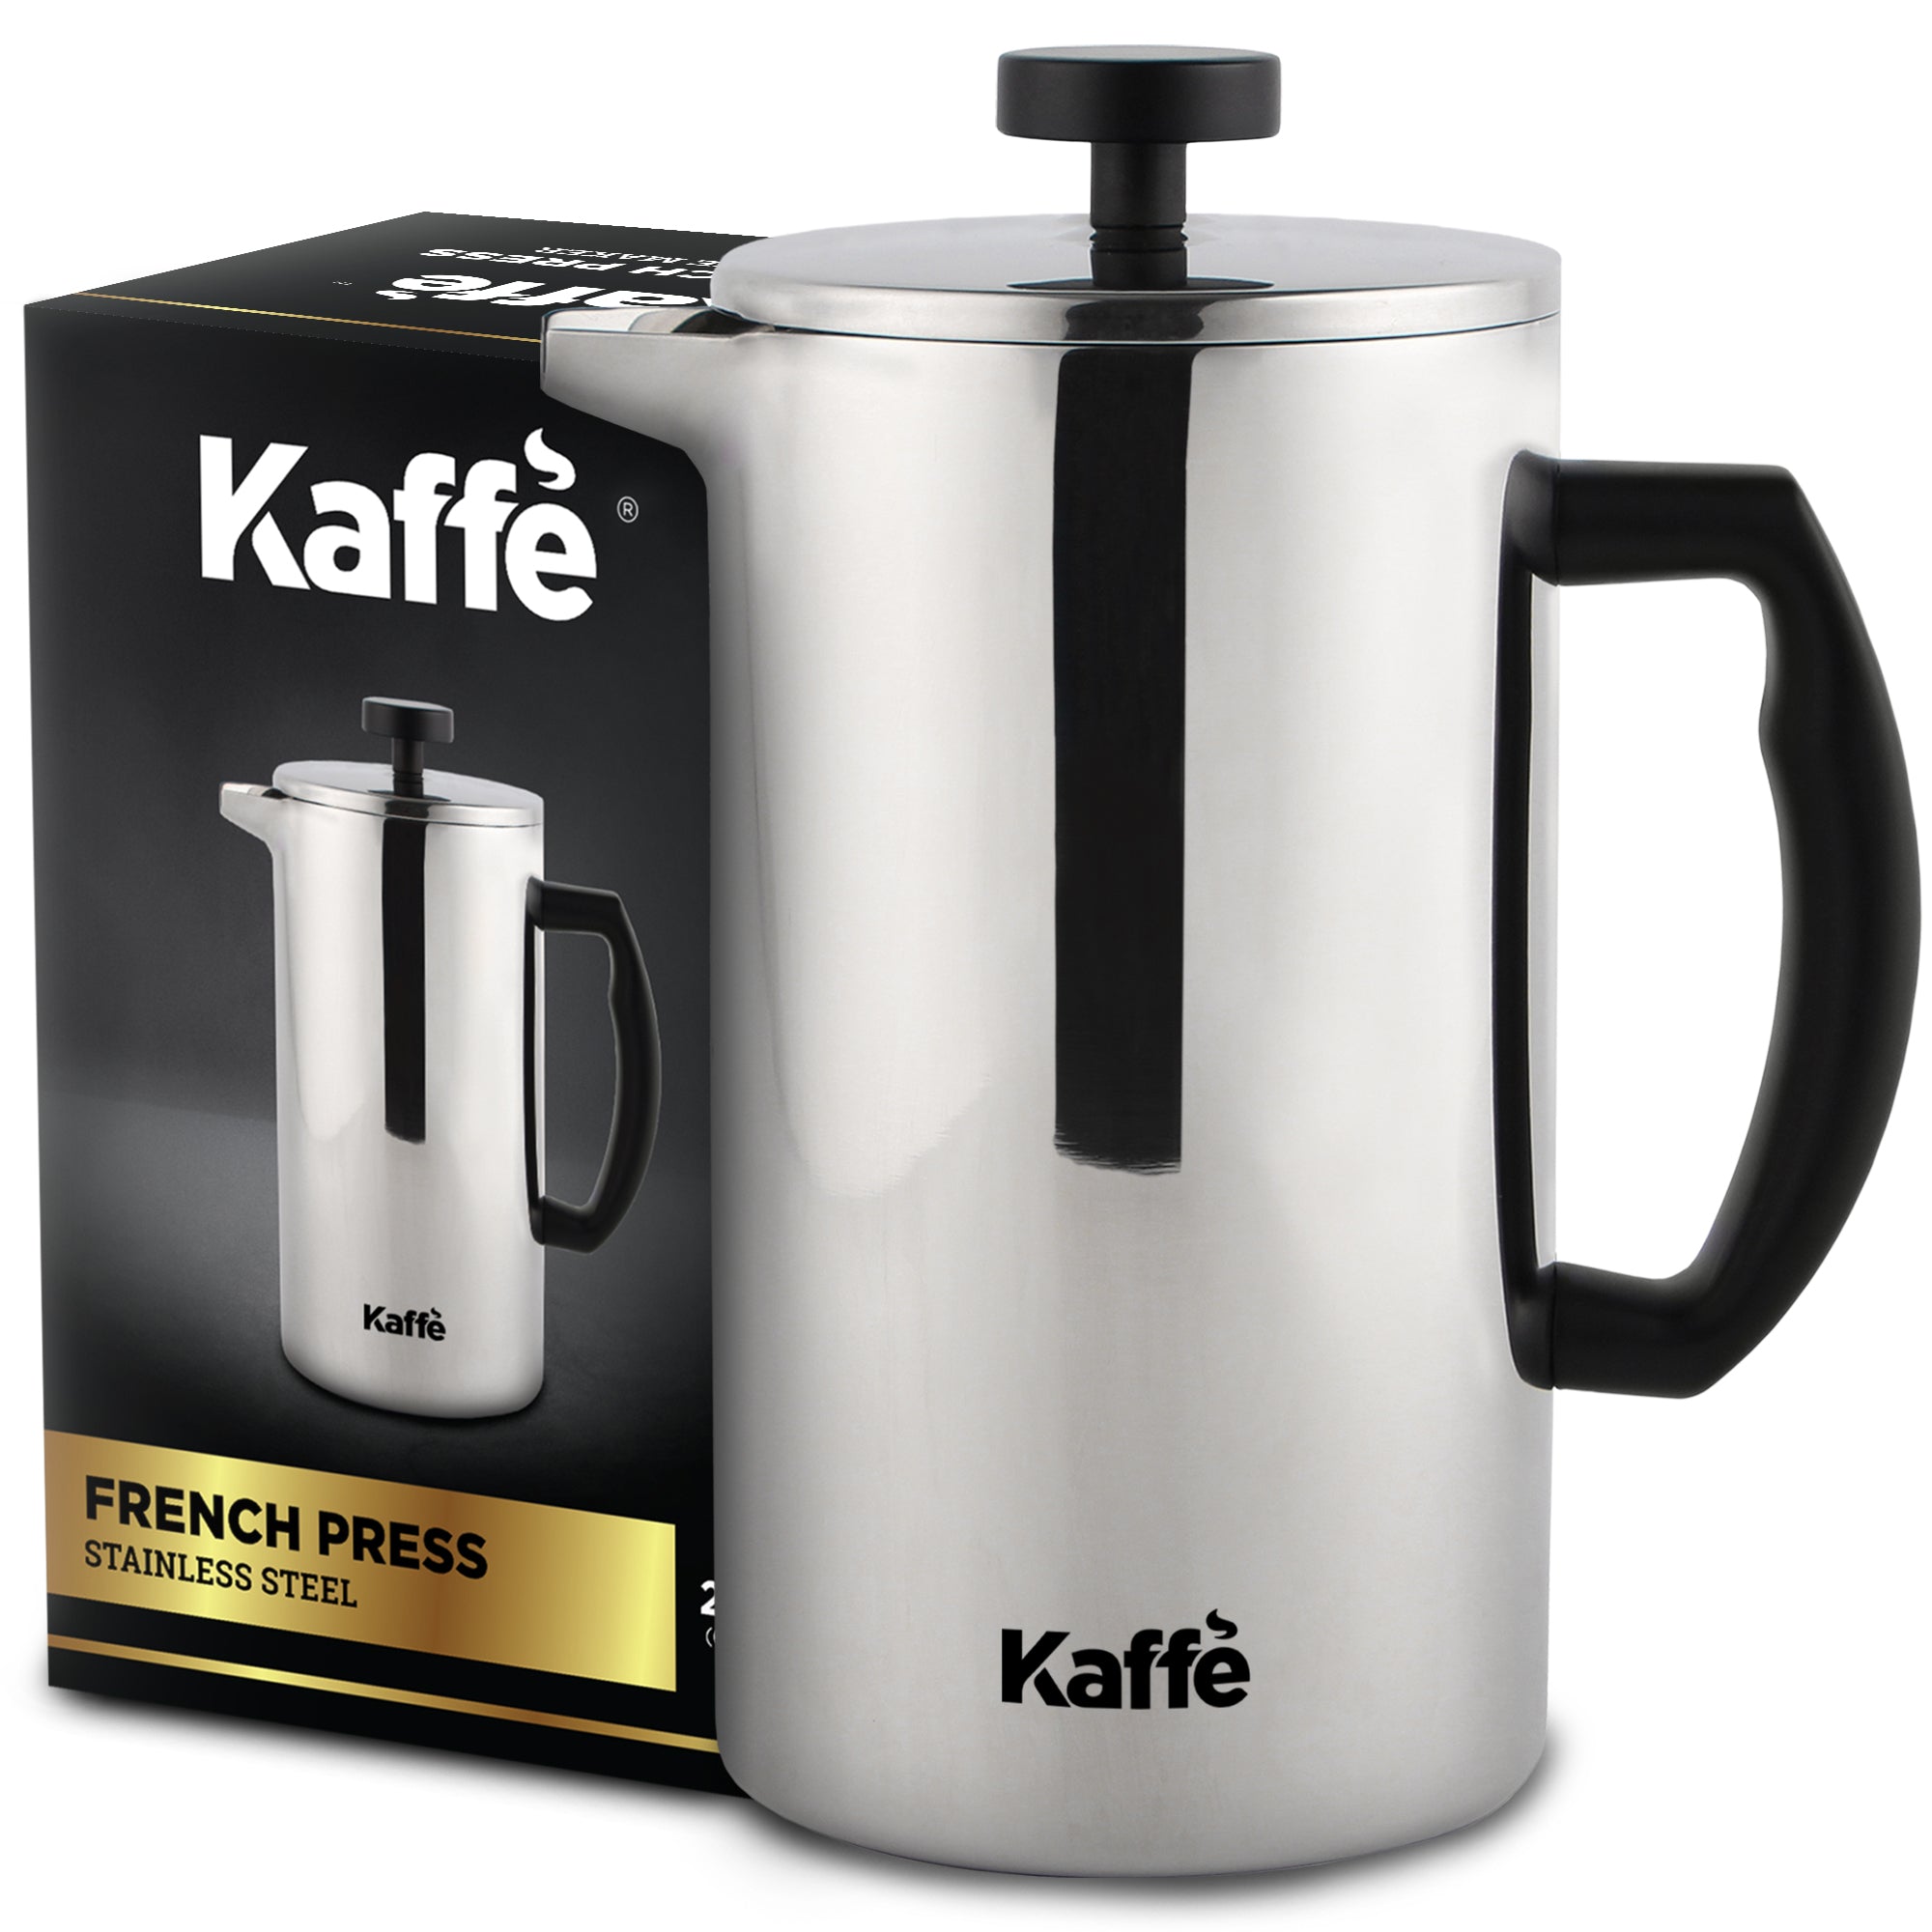 KF1020 Stainless Steel – Products Kaffe Press French